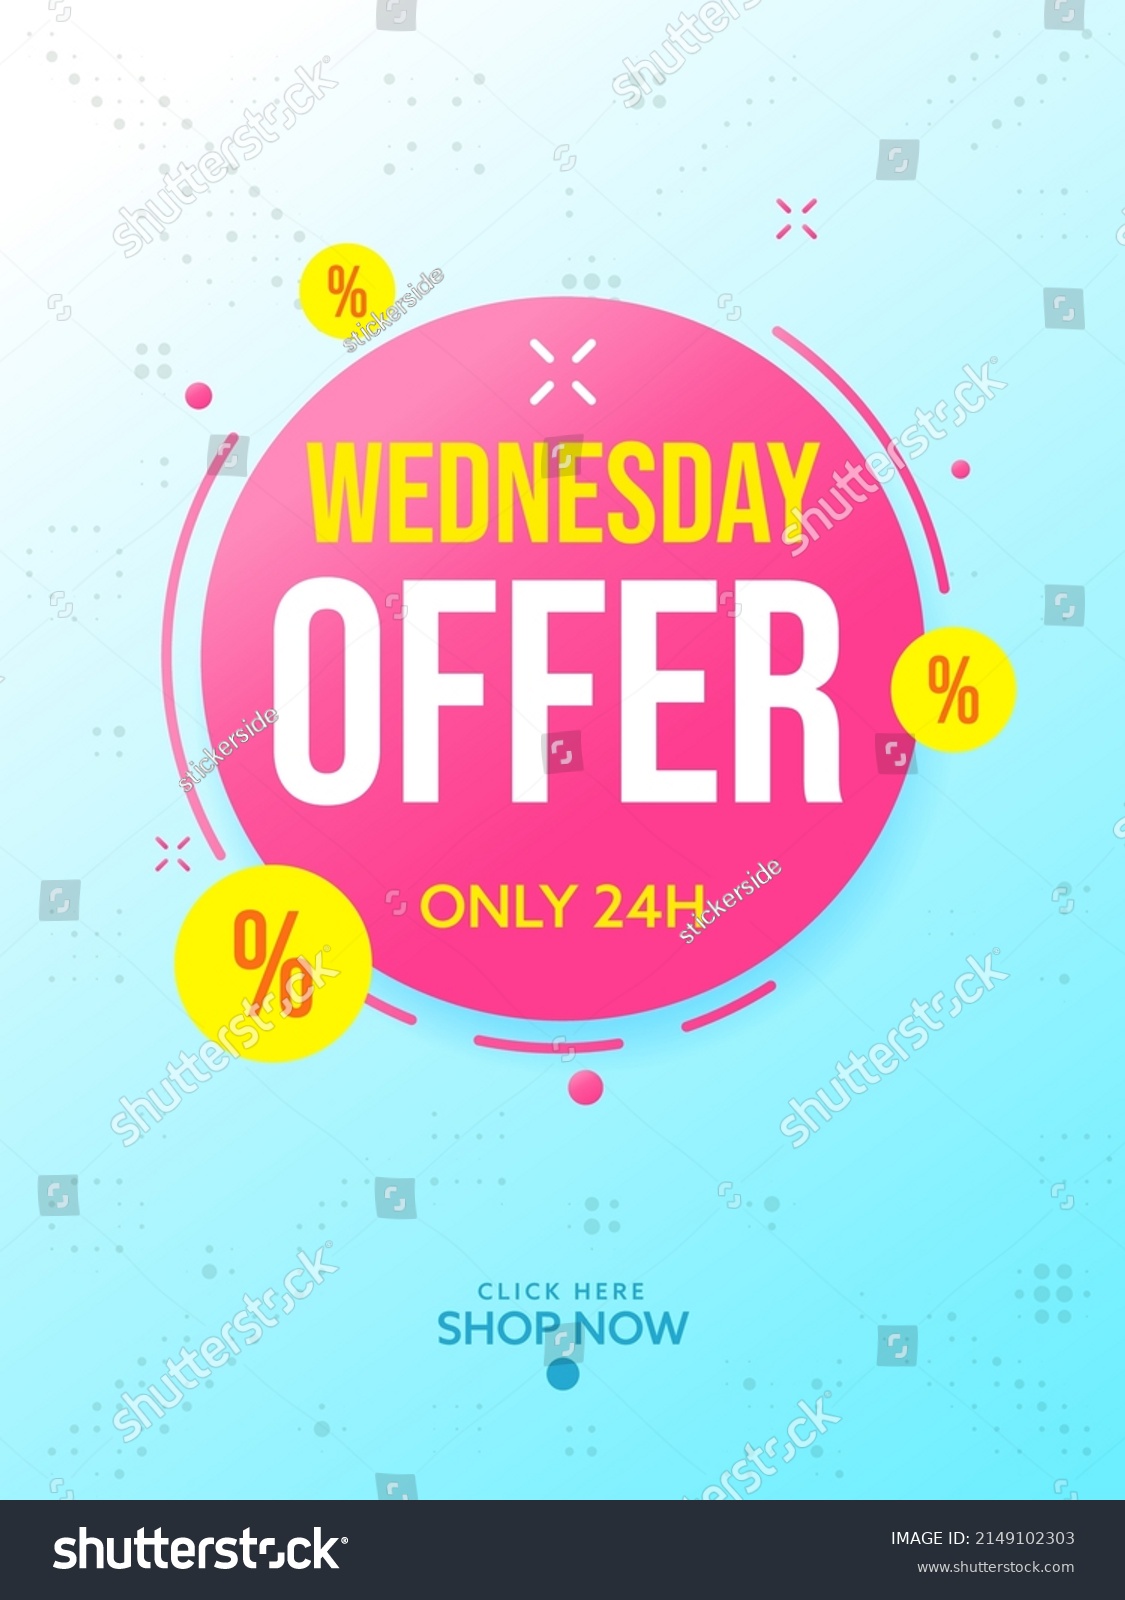 SVG of Wednesday offer sale banner template. Only 24 hour sale discount for shopping with price clearance vector illustration. Social marketing campaign svg